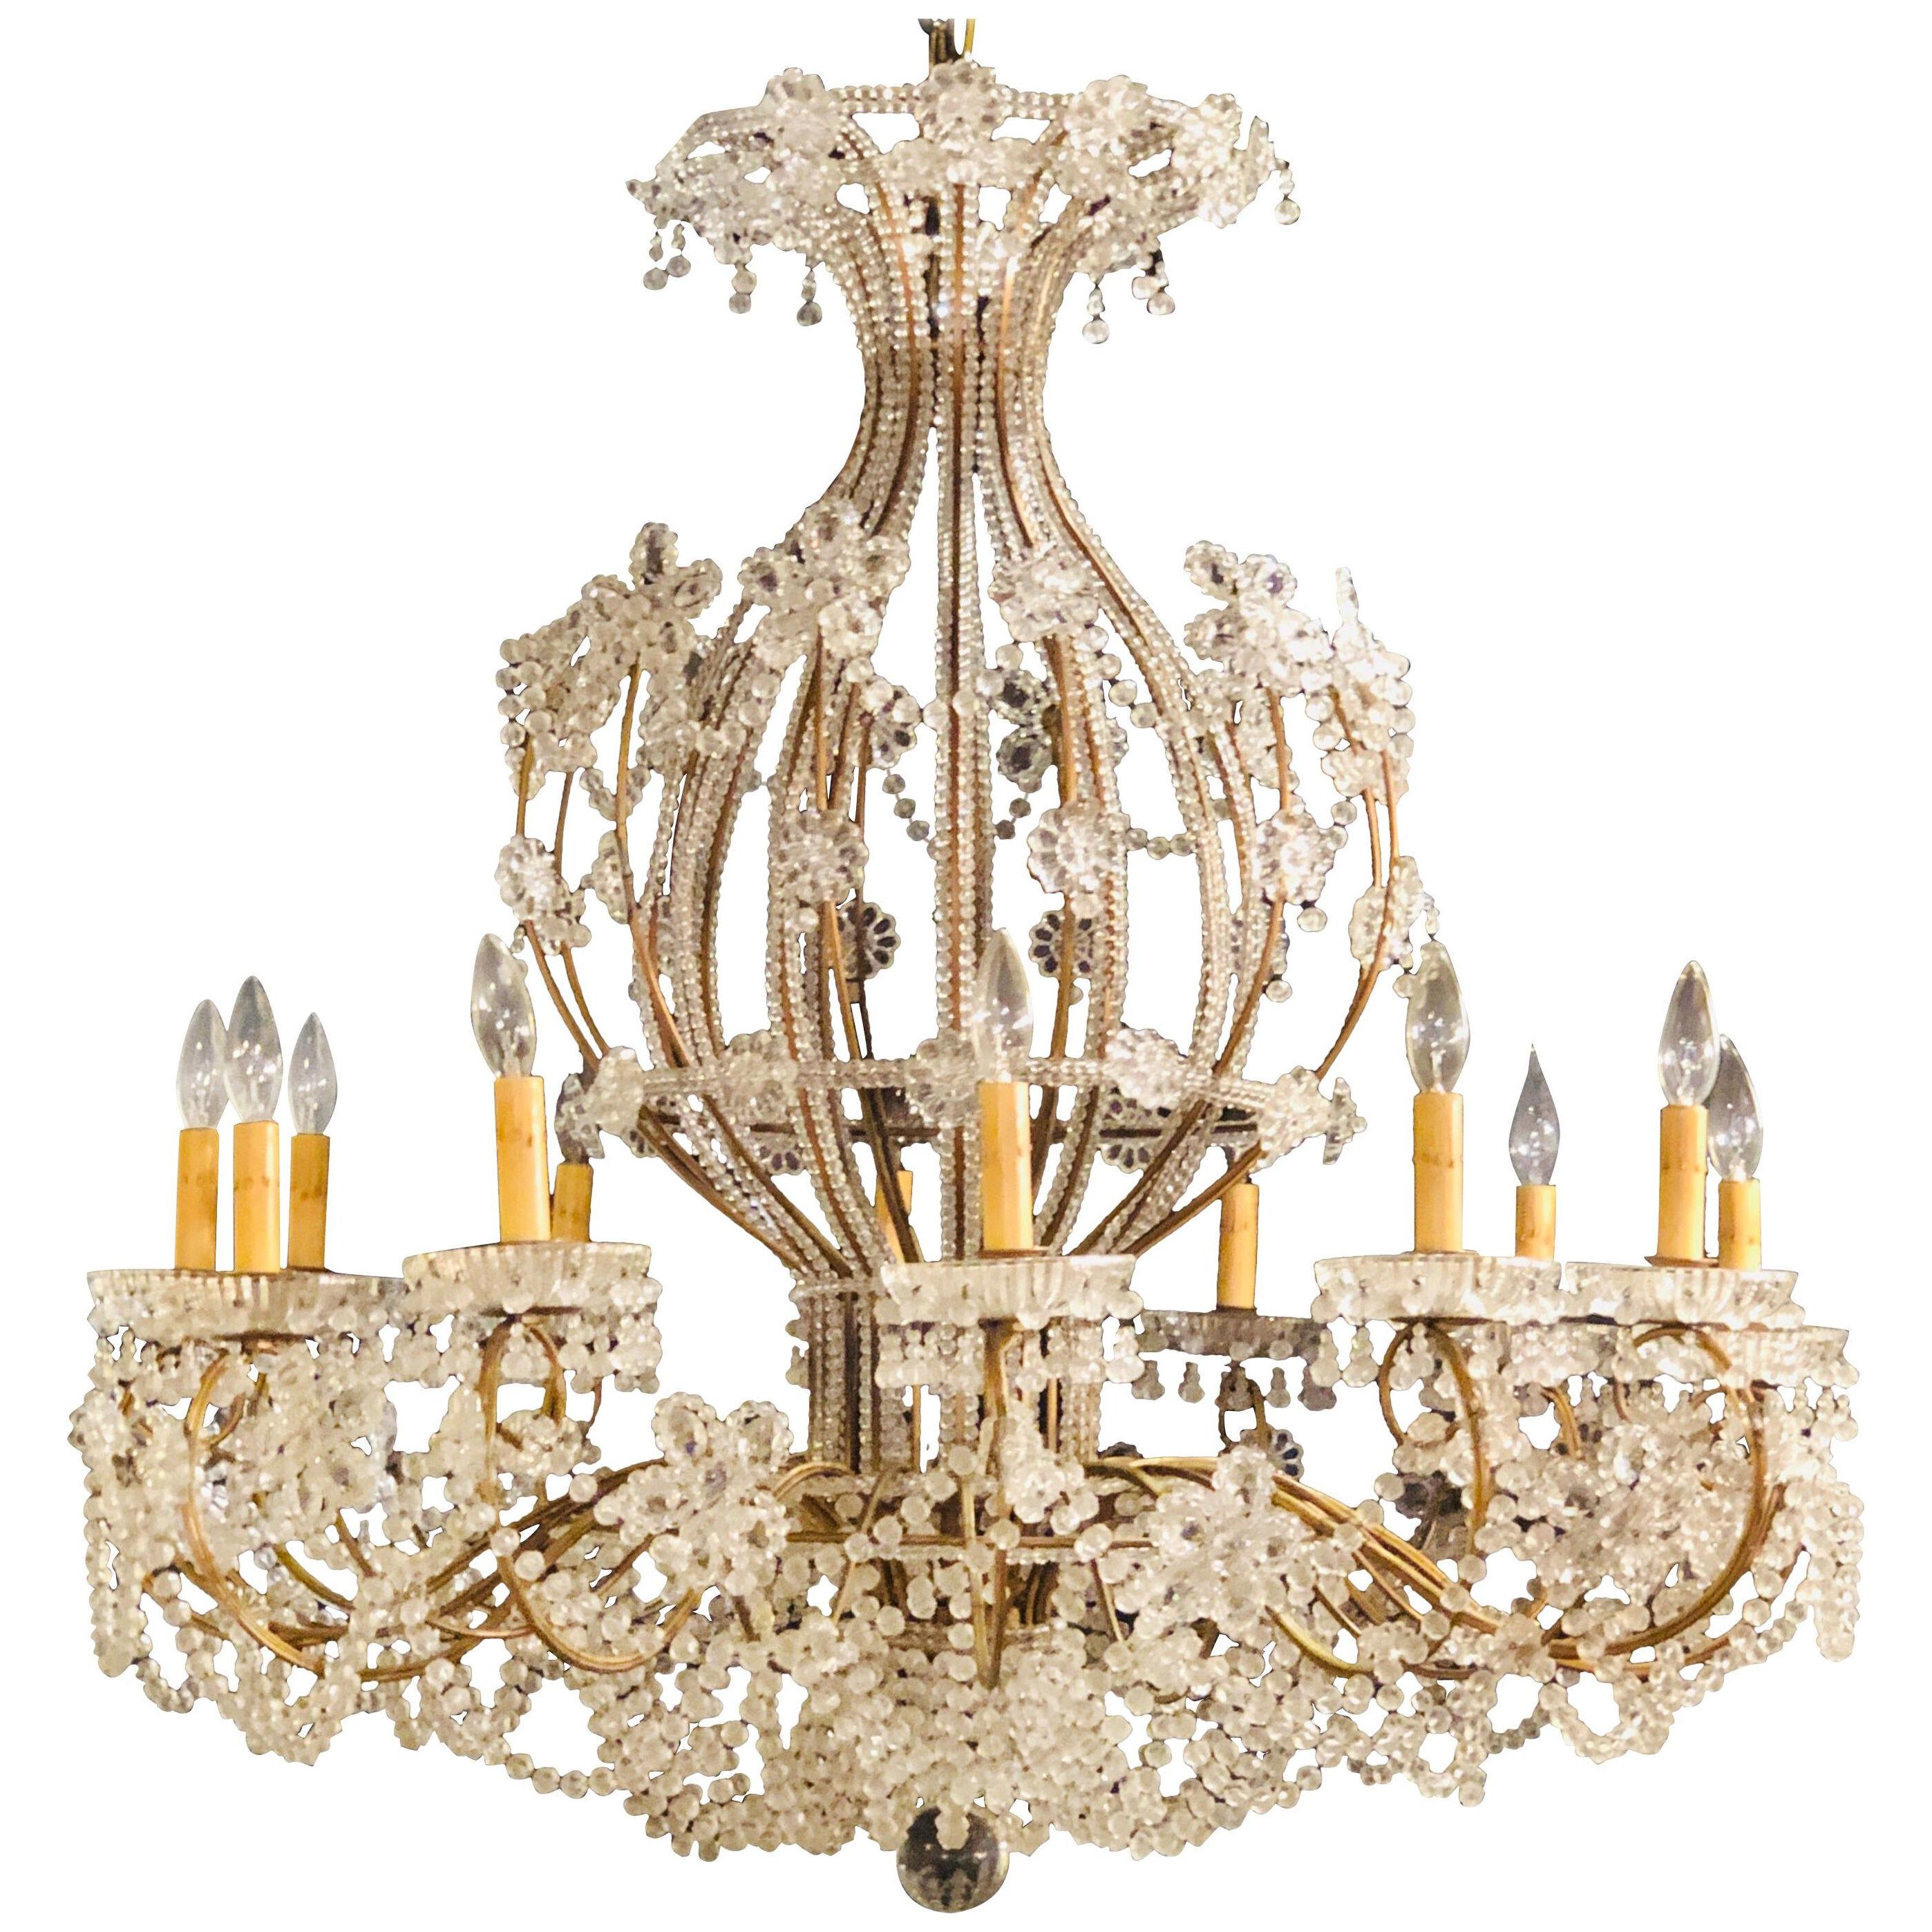 Beautiful Gilt Iron 12-Light Chandelier with Great Crystal and Bead Decoration	